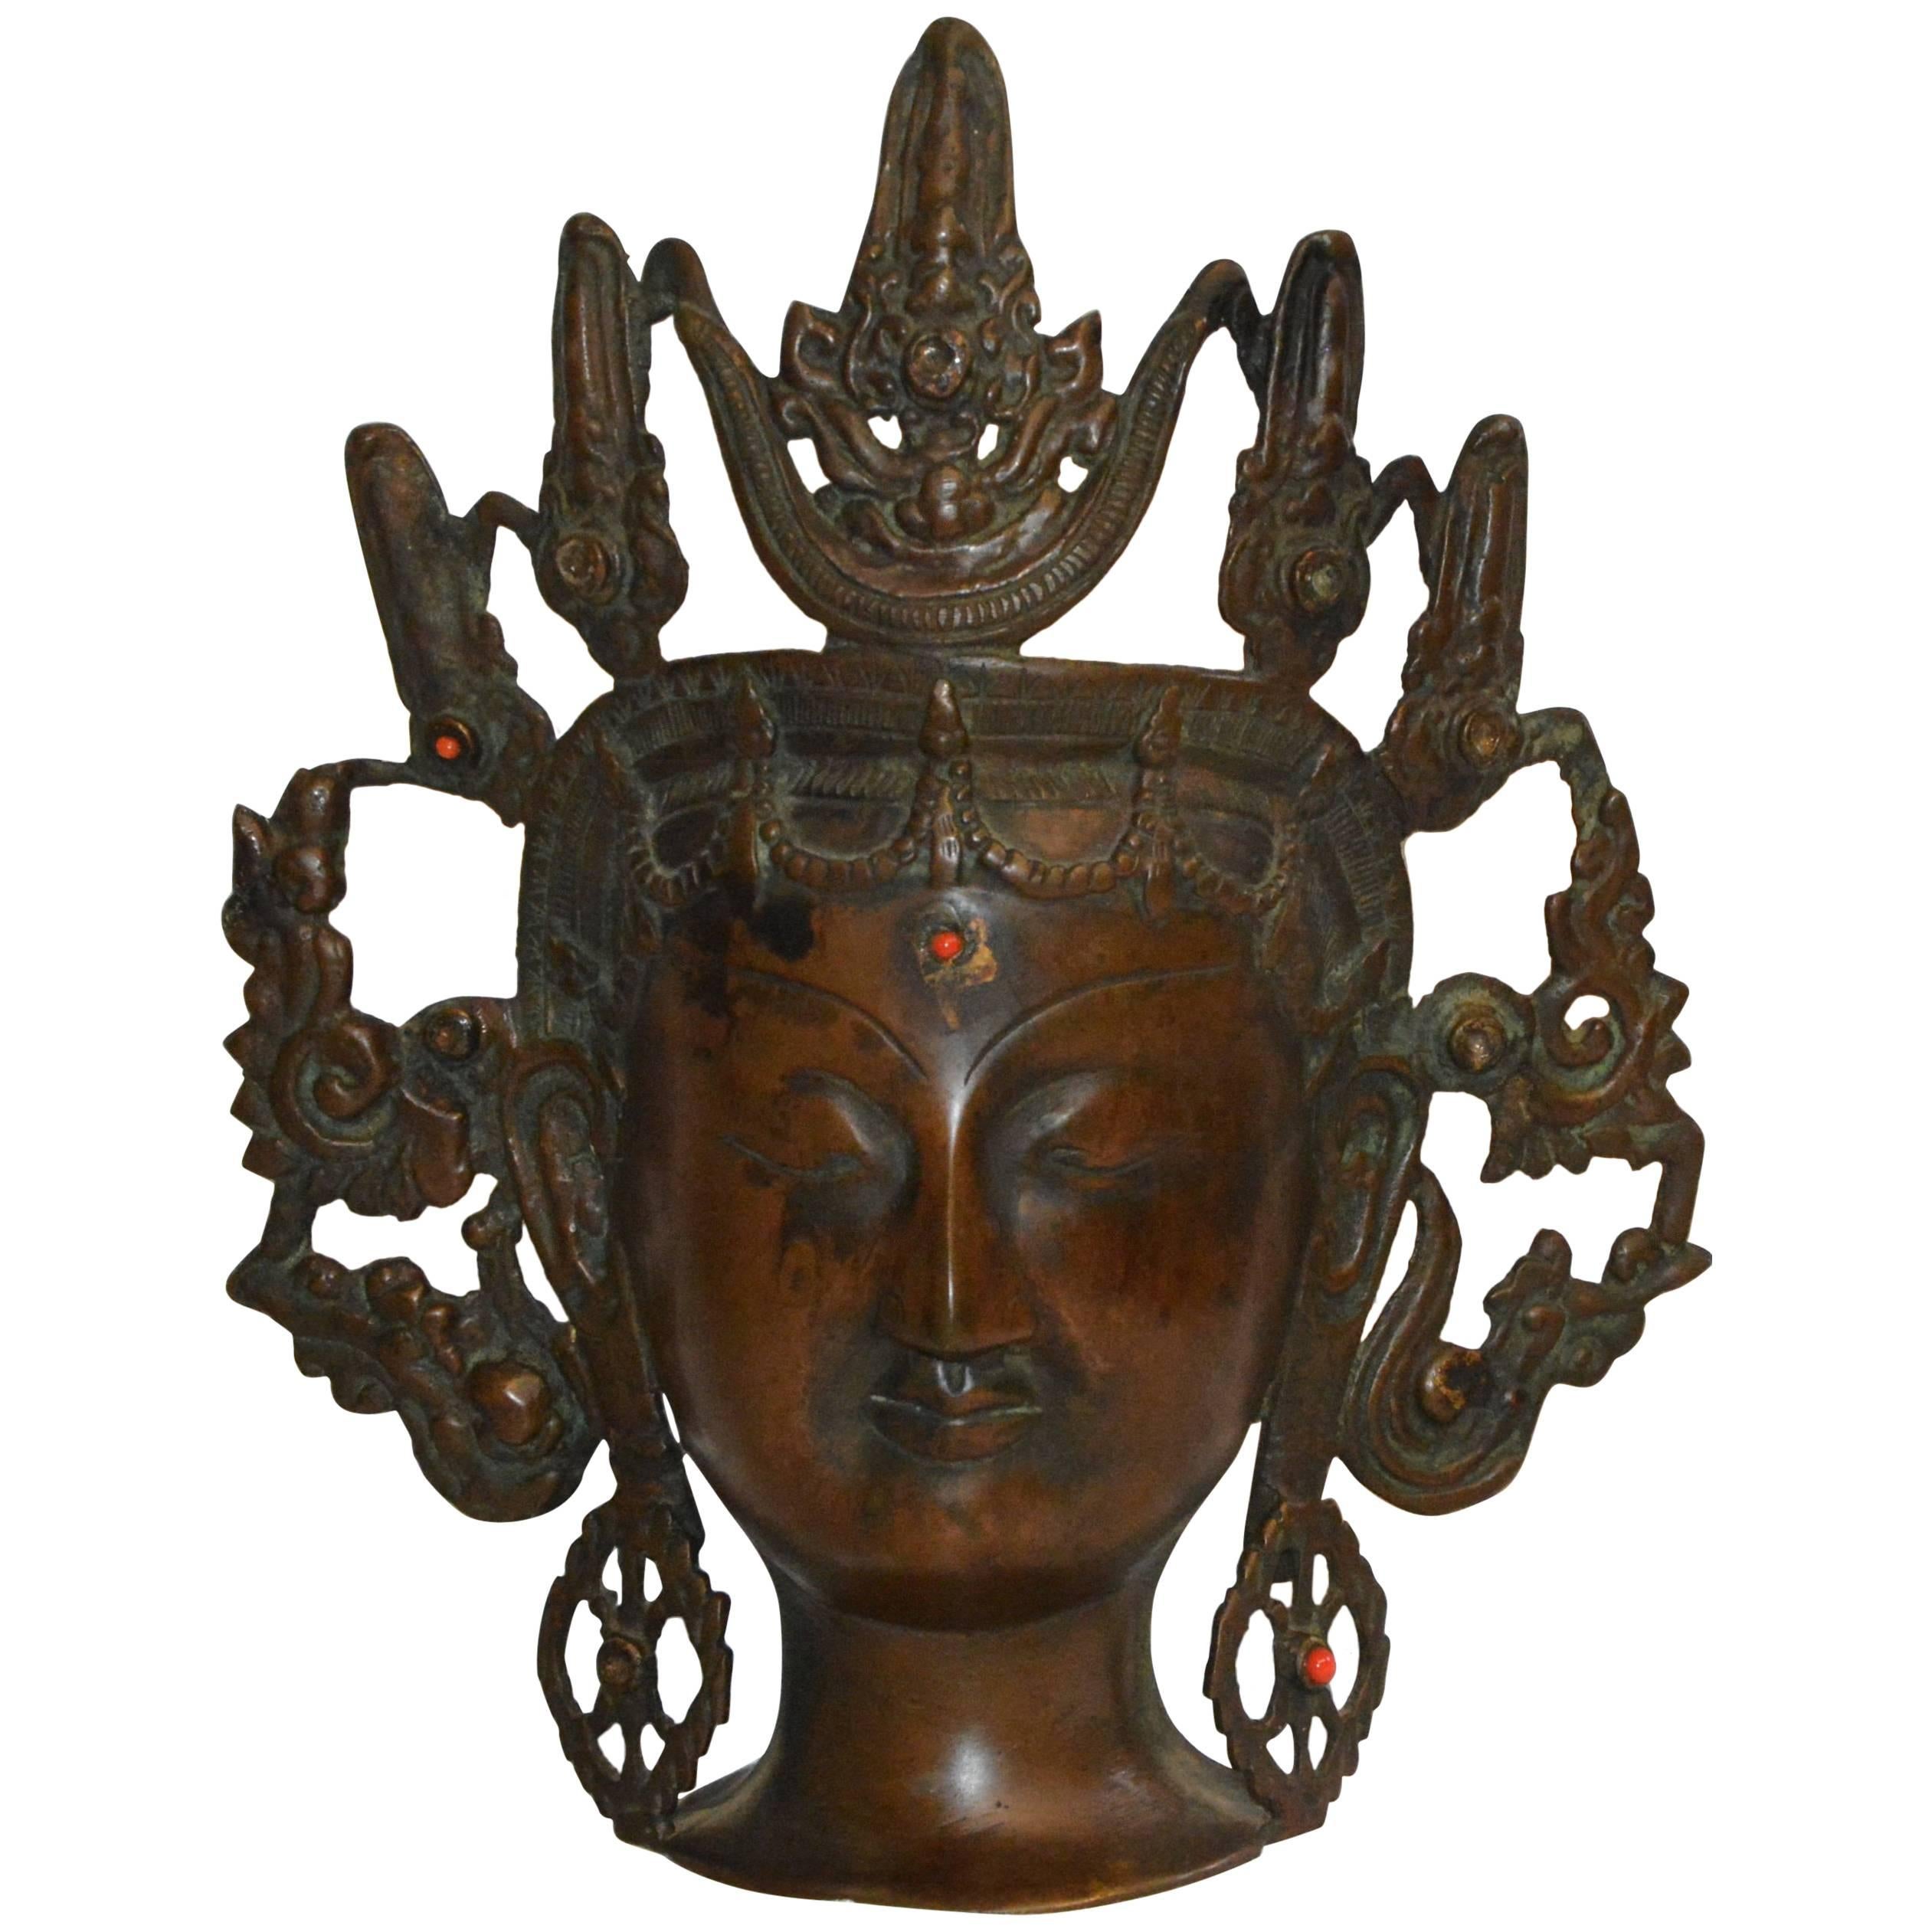 This is a Thai bronze head figurine with an ornate open work headdress. She has elongated ears with decorative earrings and a scallop border around her face. Red beads decorate her forehead and her left earring. It is marked India on the back.